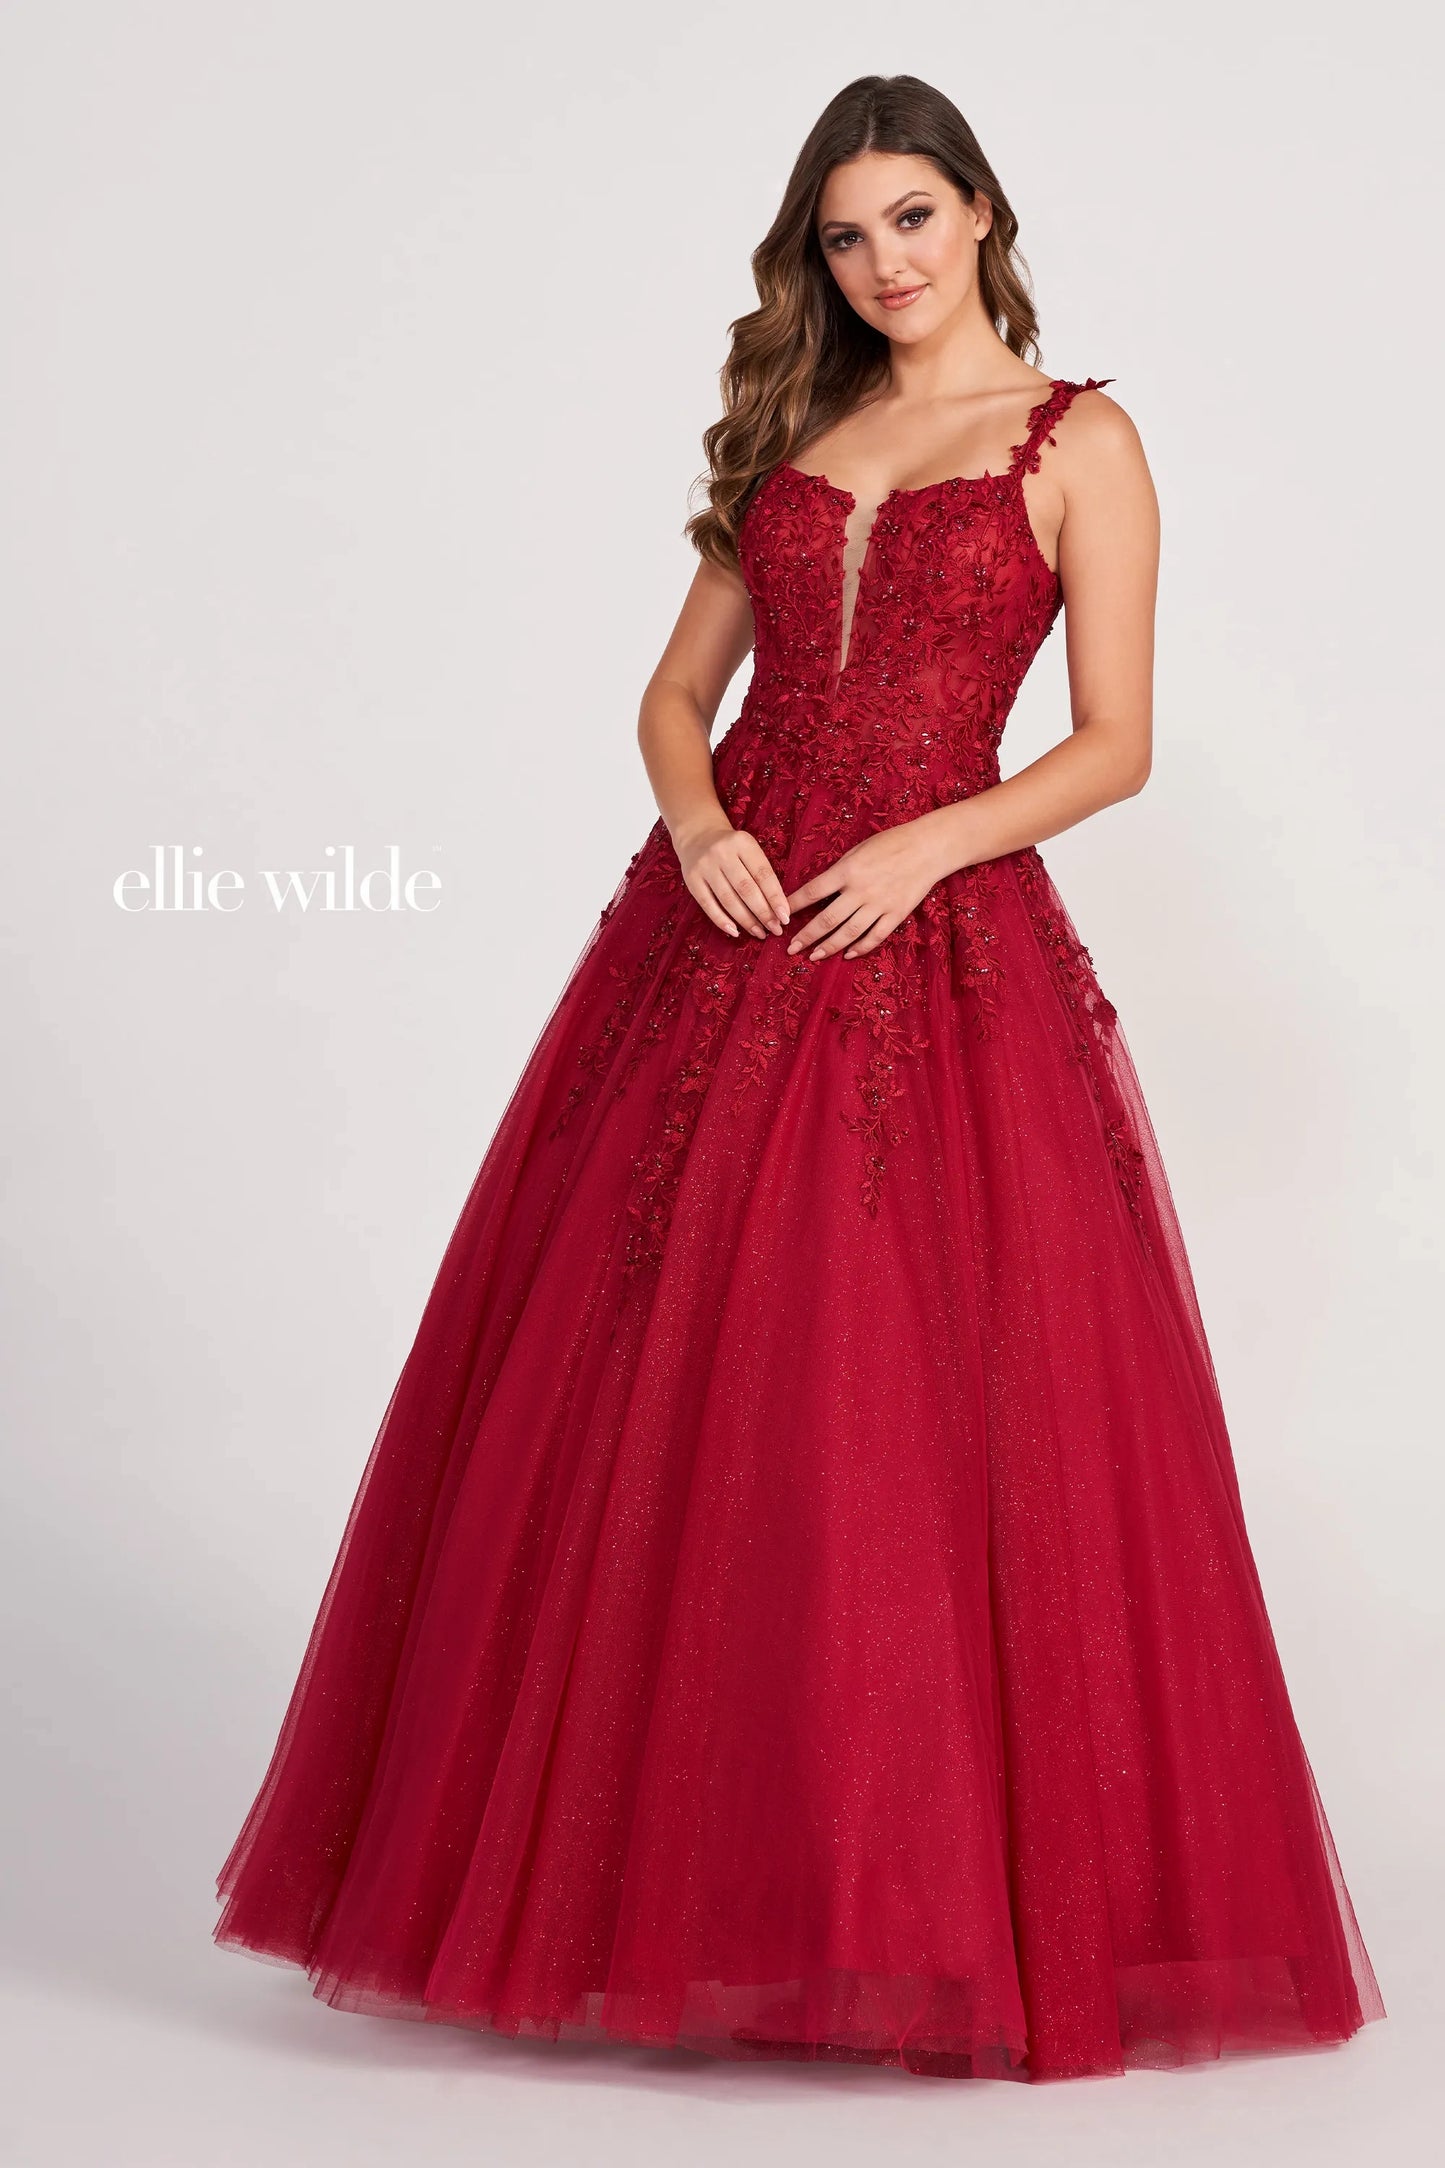 Introducing the Ellie Wilde EW120014 Long Sheer Lace Shimmer Ballgown. This sophisticated formal gown features a sheer bodice with tulle and lace appliqué, an A-line silhouette, plunging V-neckline and natural waist for a flattering fit. The skirt flows to the floor for an airy and graceful look. Make a lasting impression at your prom or special occasion.  Sizes: 00-24  Colors: PERIWINKLE, LAVENDER, RED, ROSE QUARTZ, ROYAL BLUE, WINE, TEAL, WHITE, EMERALD, NAVY BLUE, BLACK, PEONY